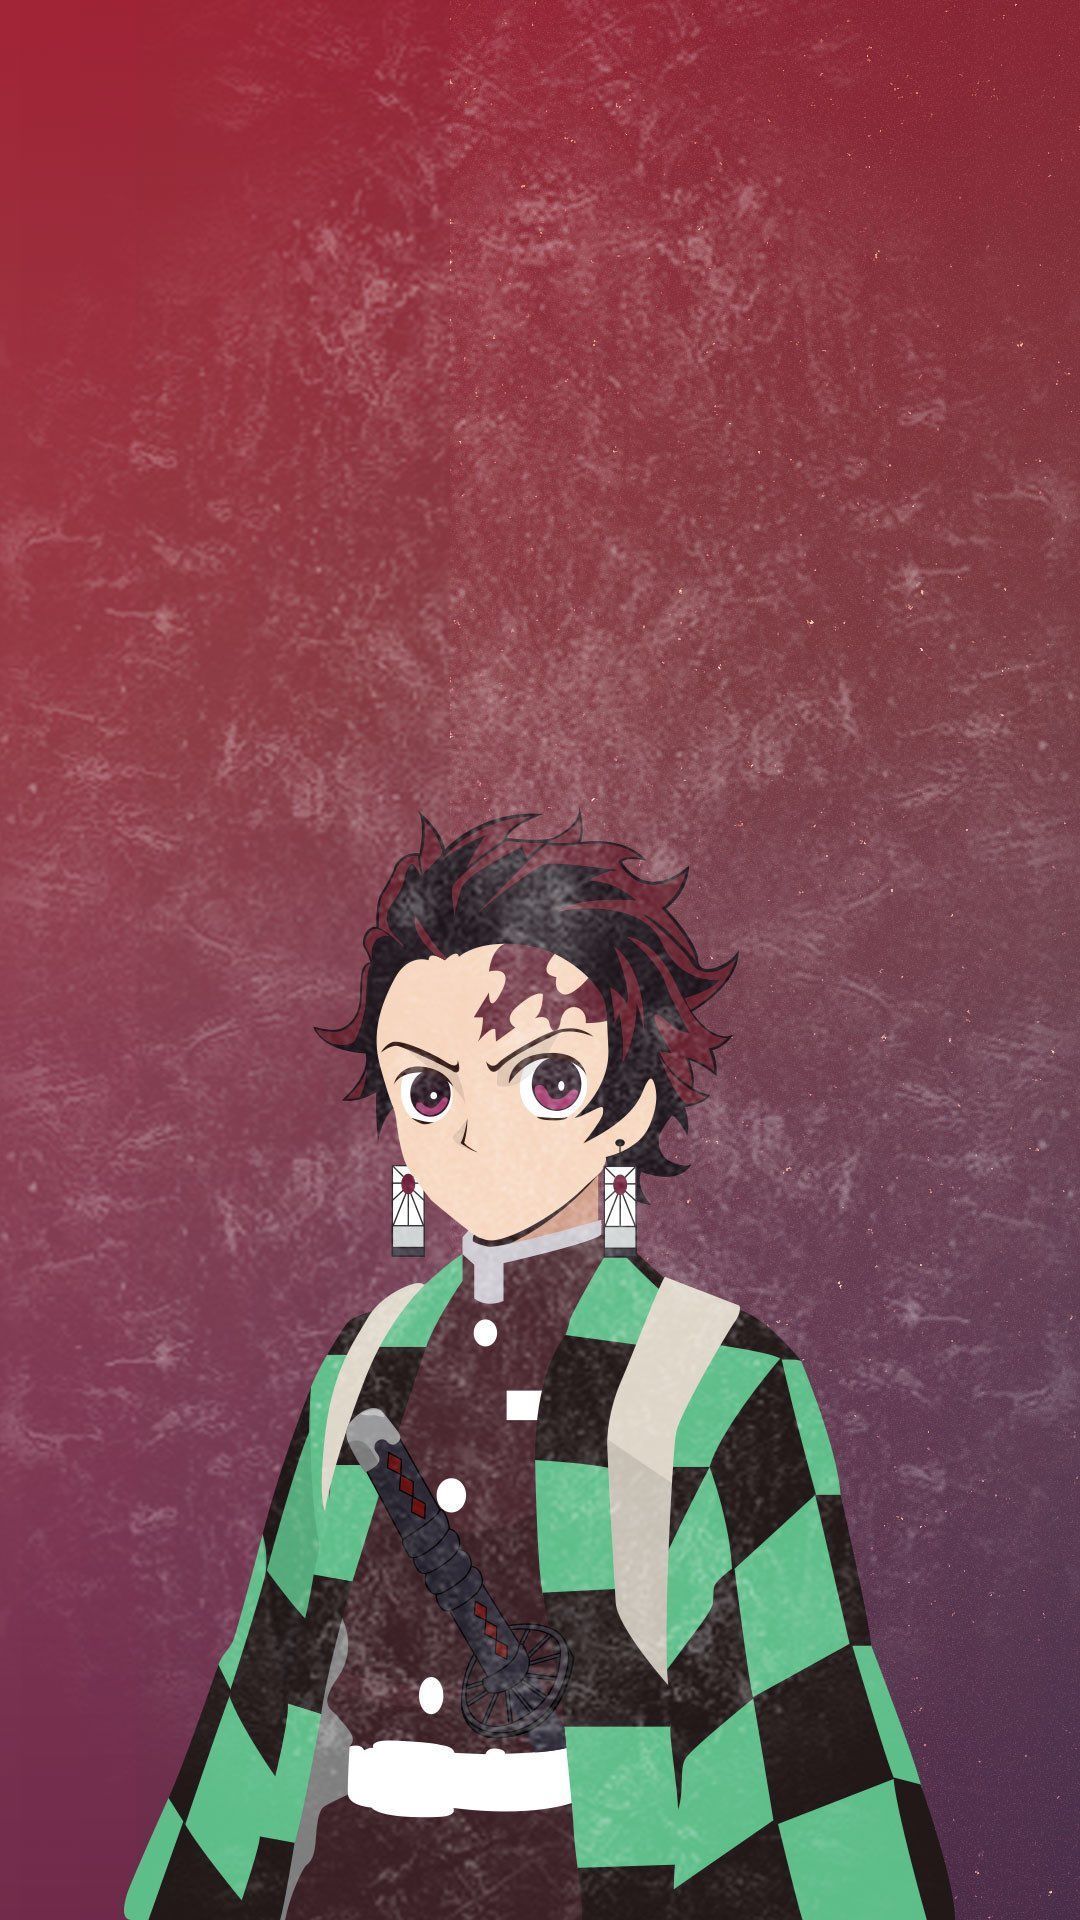 Demon Slayer Phone Wallpaper with high-resolution 1080x1920 pixel. You can use this wallpaper for your iPhone 5, 6, 7, 8, X, XS, XR backgrounds, Mobile Screensaver, or iPad Lock Screen - Tanjiro Kamado